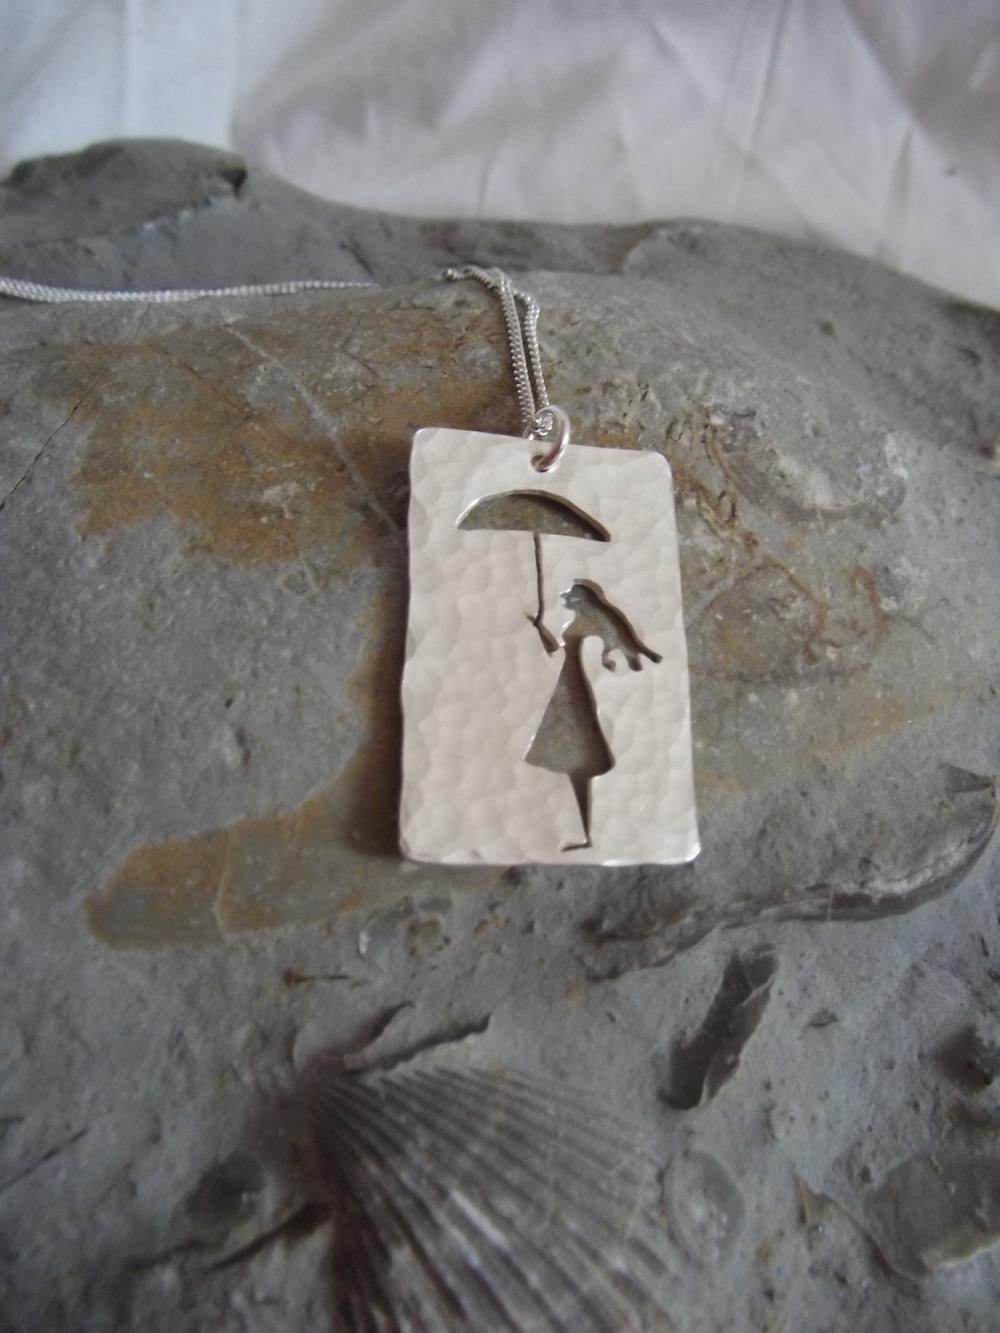 Pendant Girl With Umbrella : A Sterling Silver Pendant With A Little Girl Holding Her Umbrella On A Background Of Textured Silver.